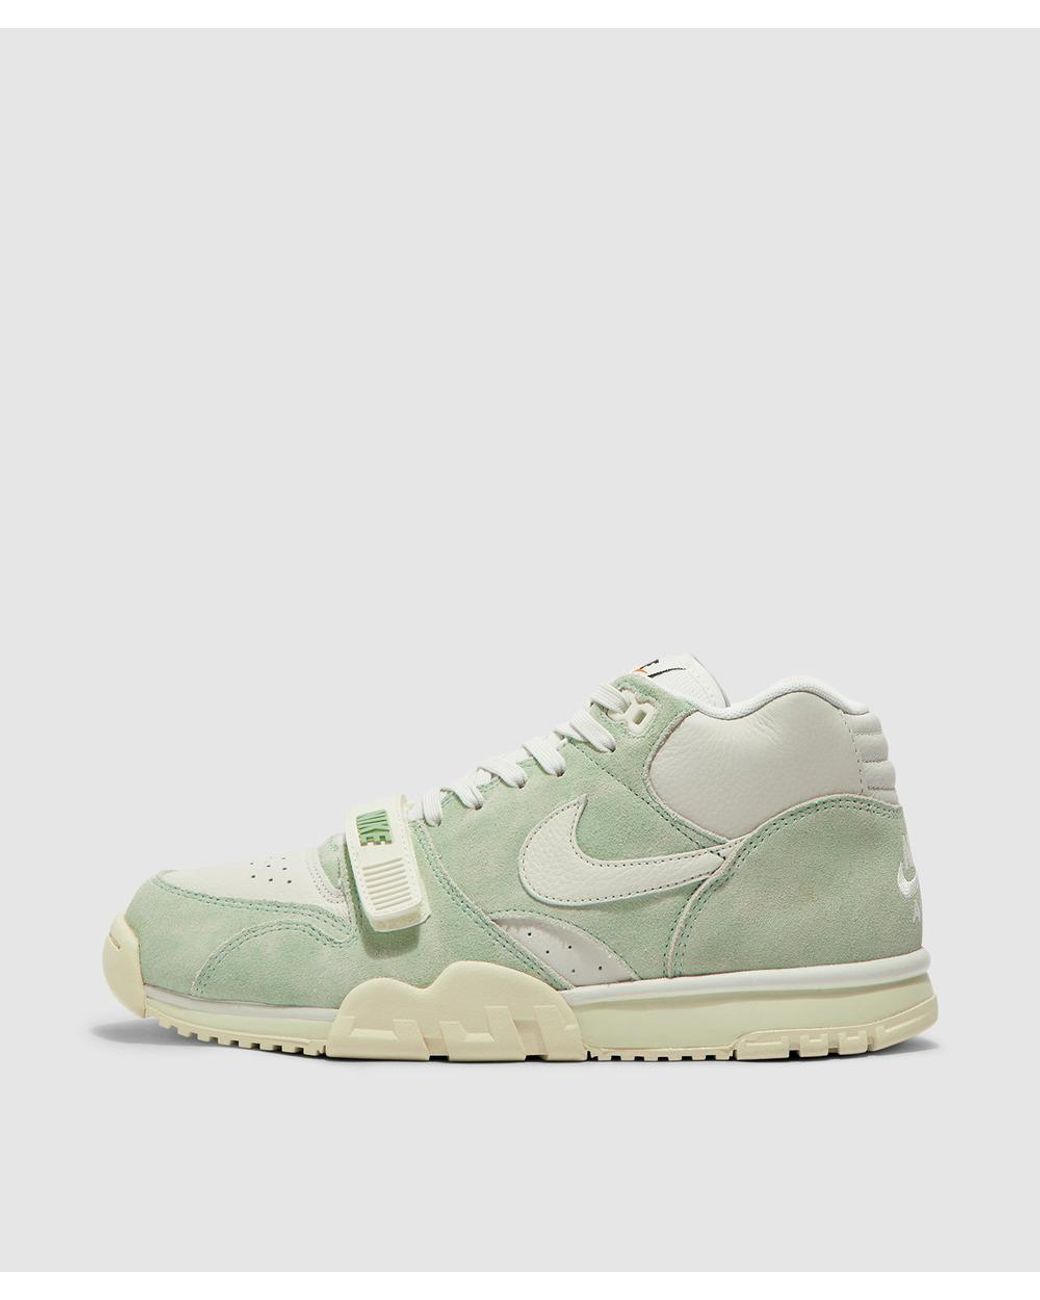 Nike Leather Air Trainer 1 Sneaker in Green for Men - Save 5% | Lyst